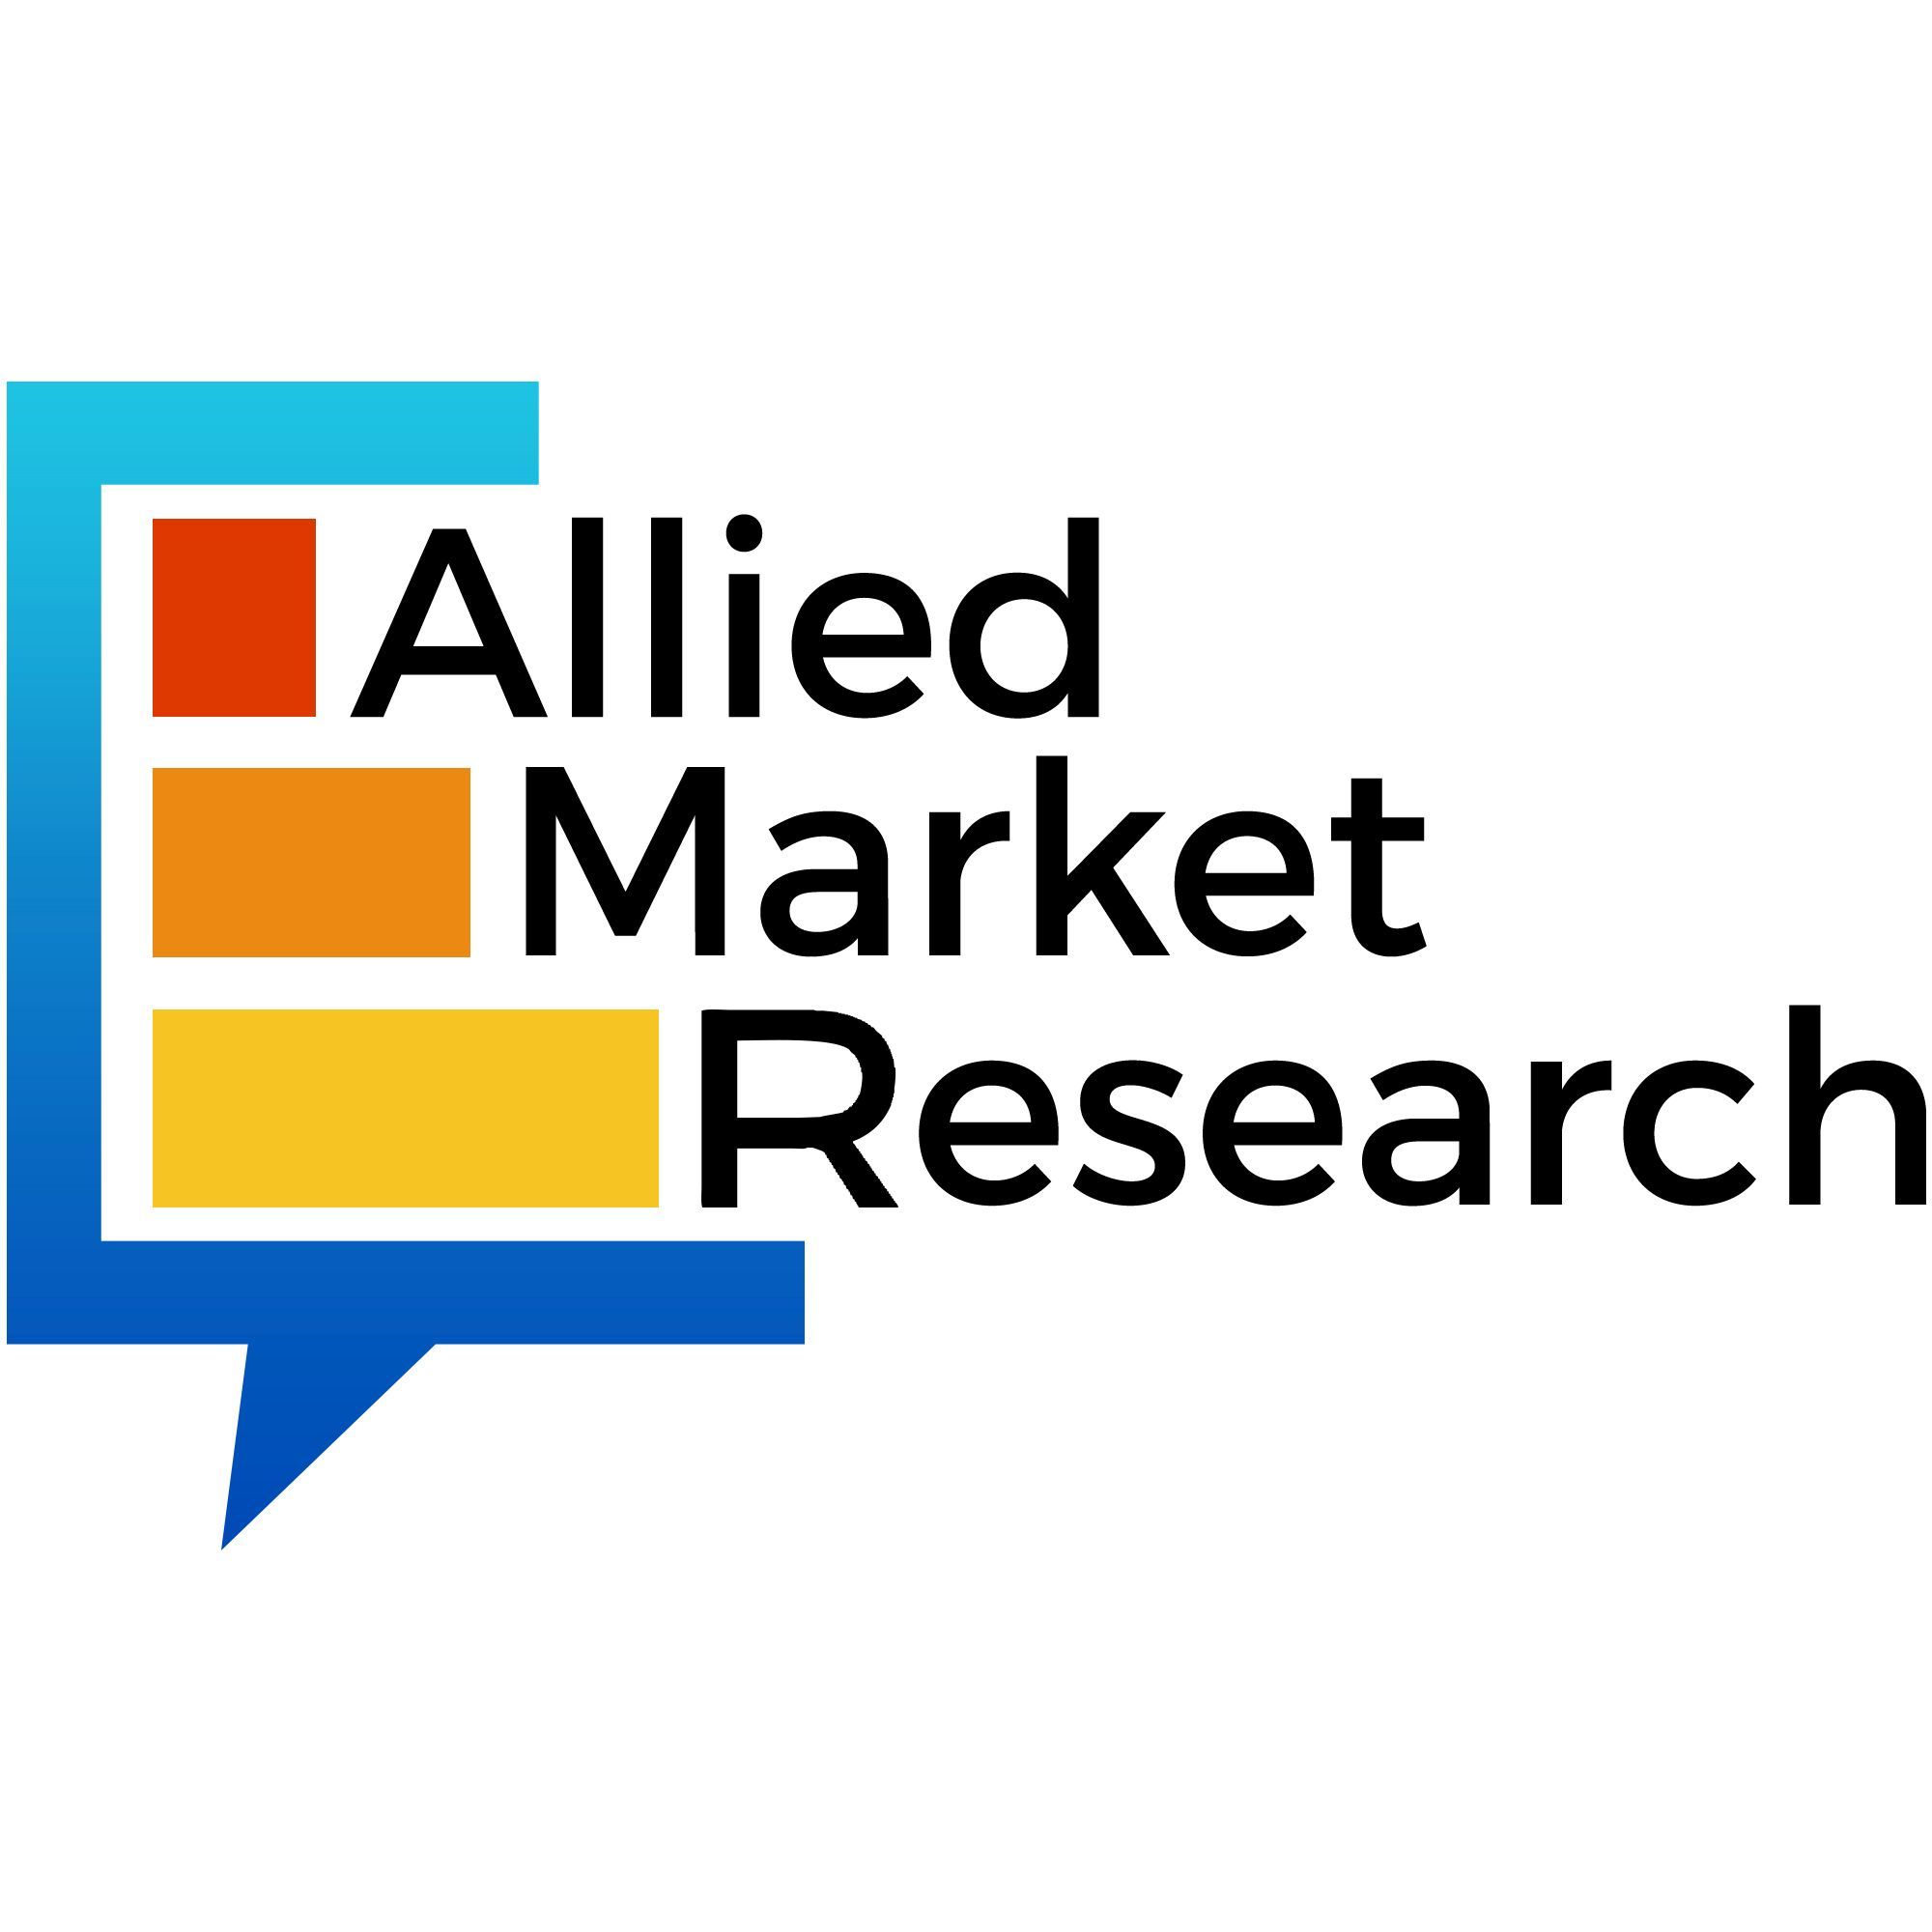 Mindfulness Meditation Application Market to Reach $307.1 Million, Globally, by 2031 at 12.4% CAGR: Allied Market Research